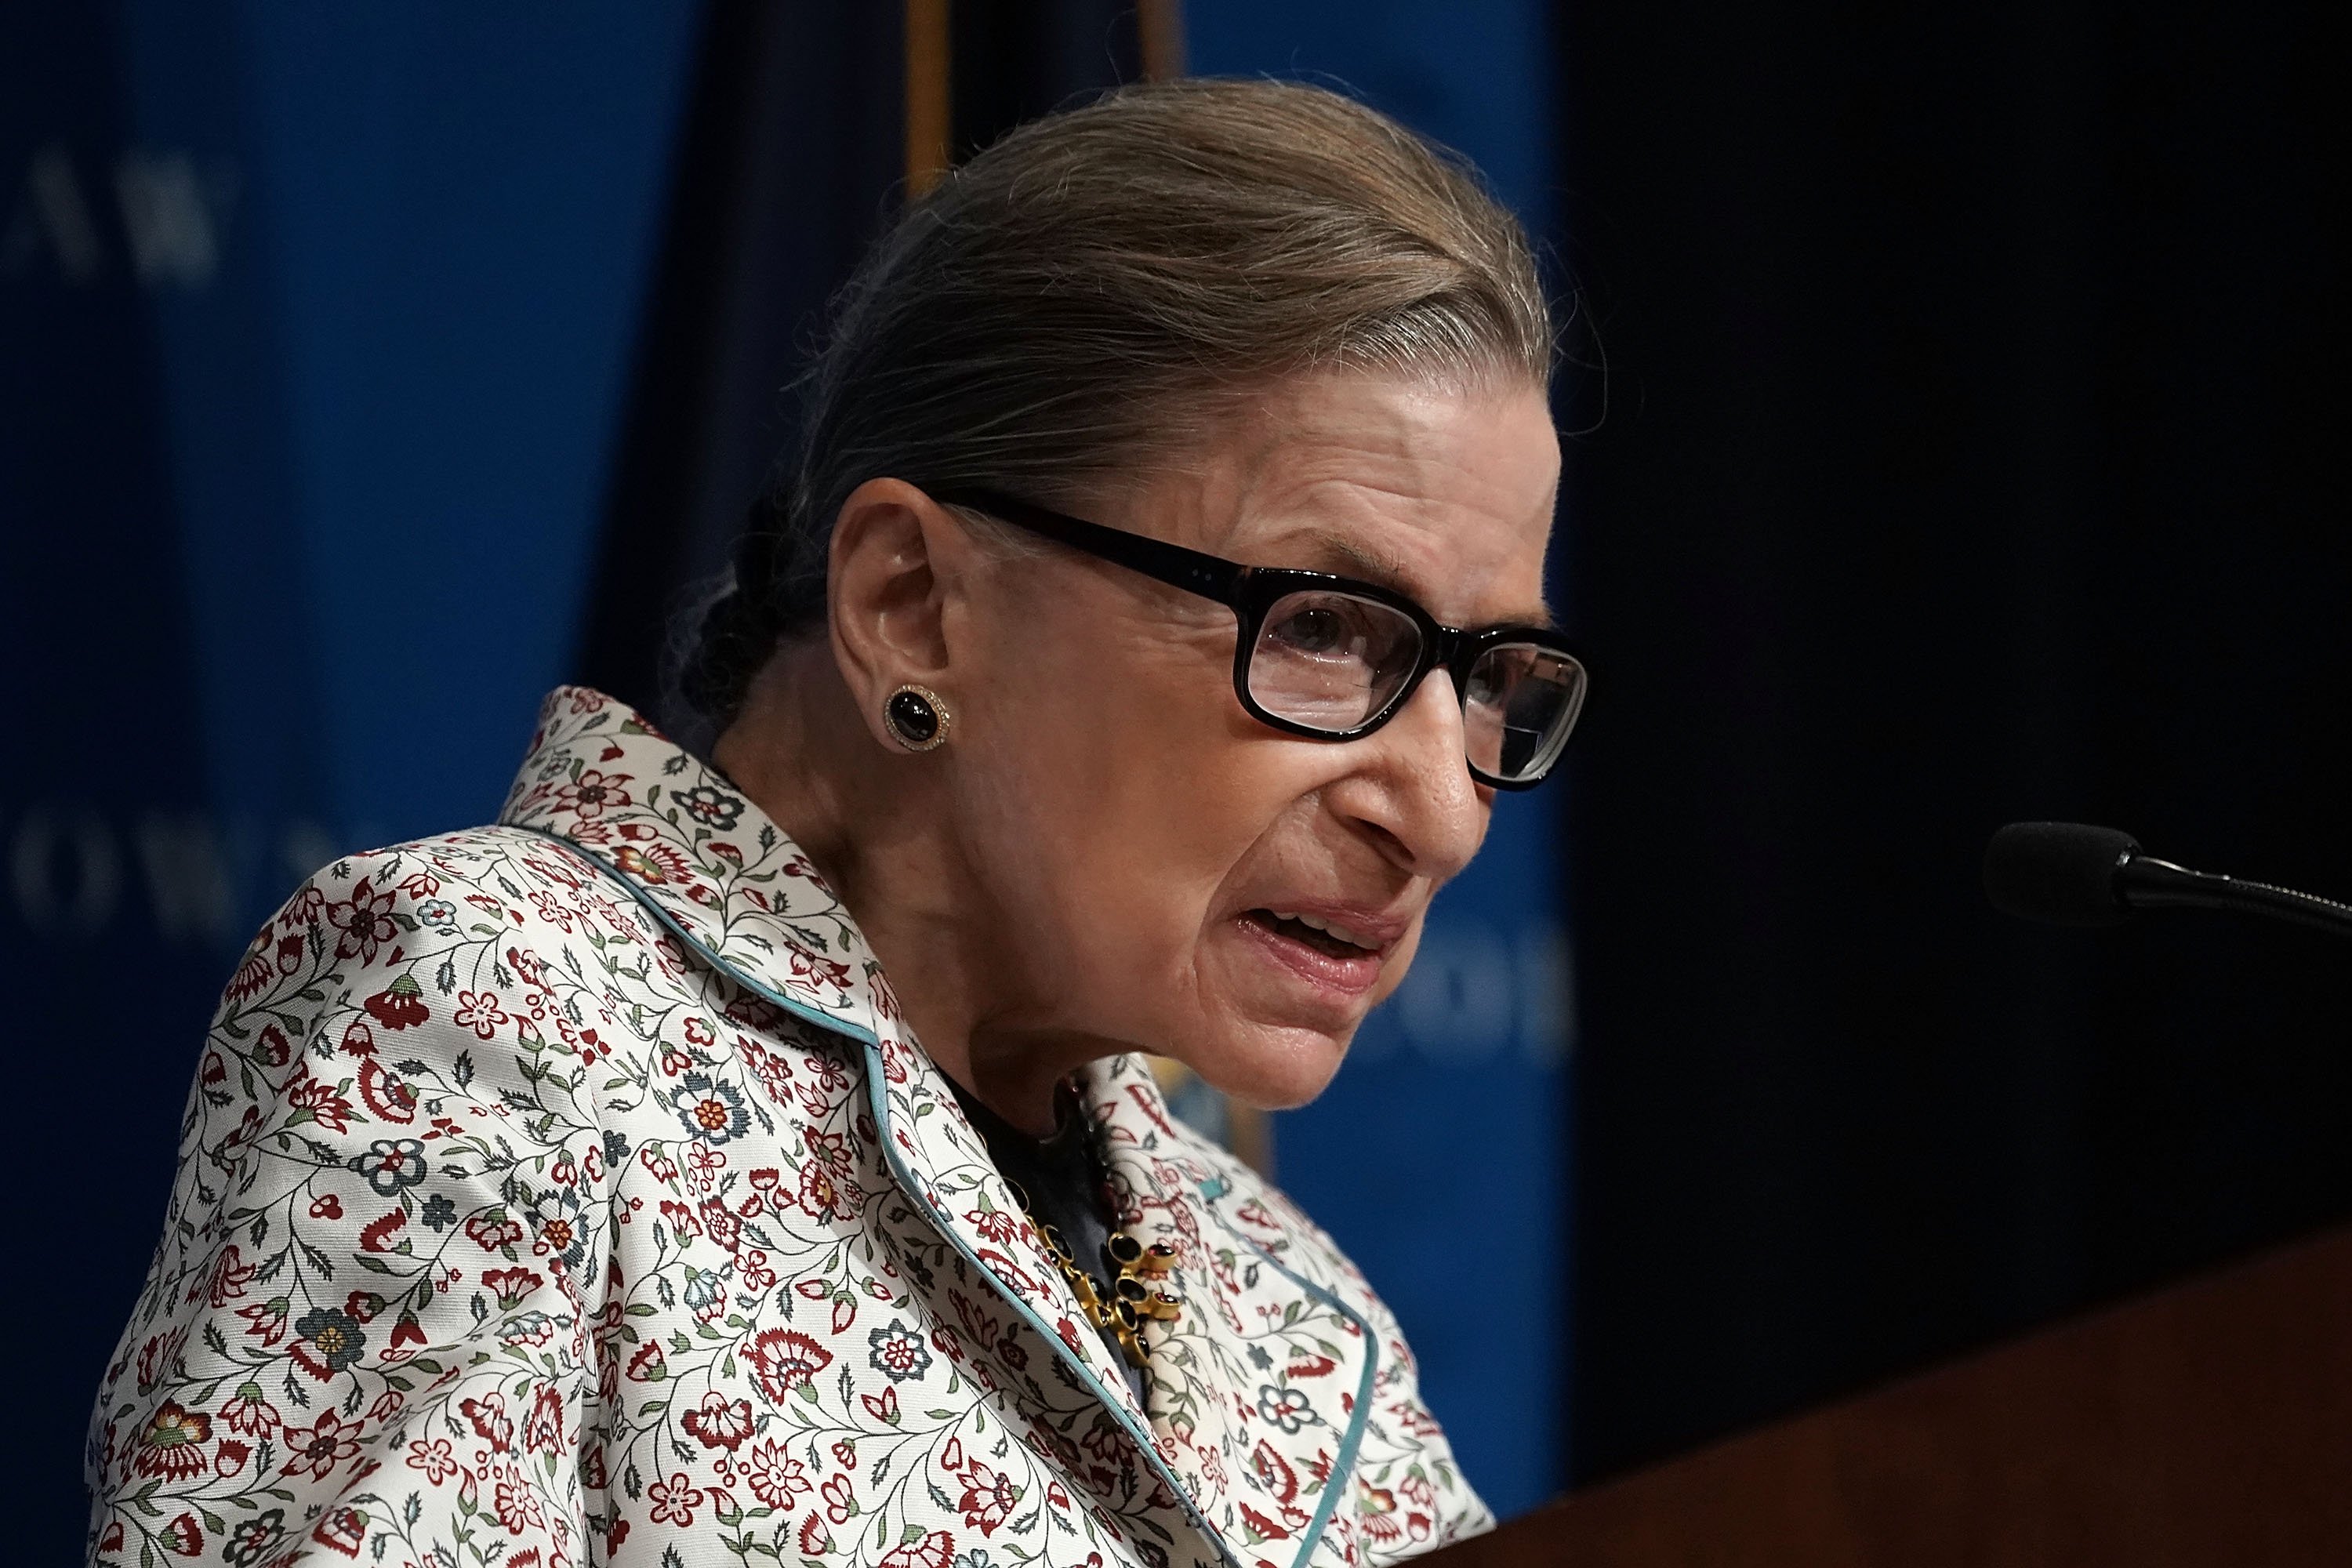 Supreme Court Justice Ruth Bader Ginsburg participates in a lecture September 26, 2018 | Photo: Getty Images